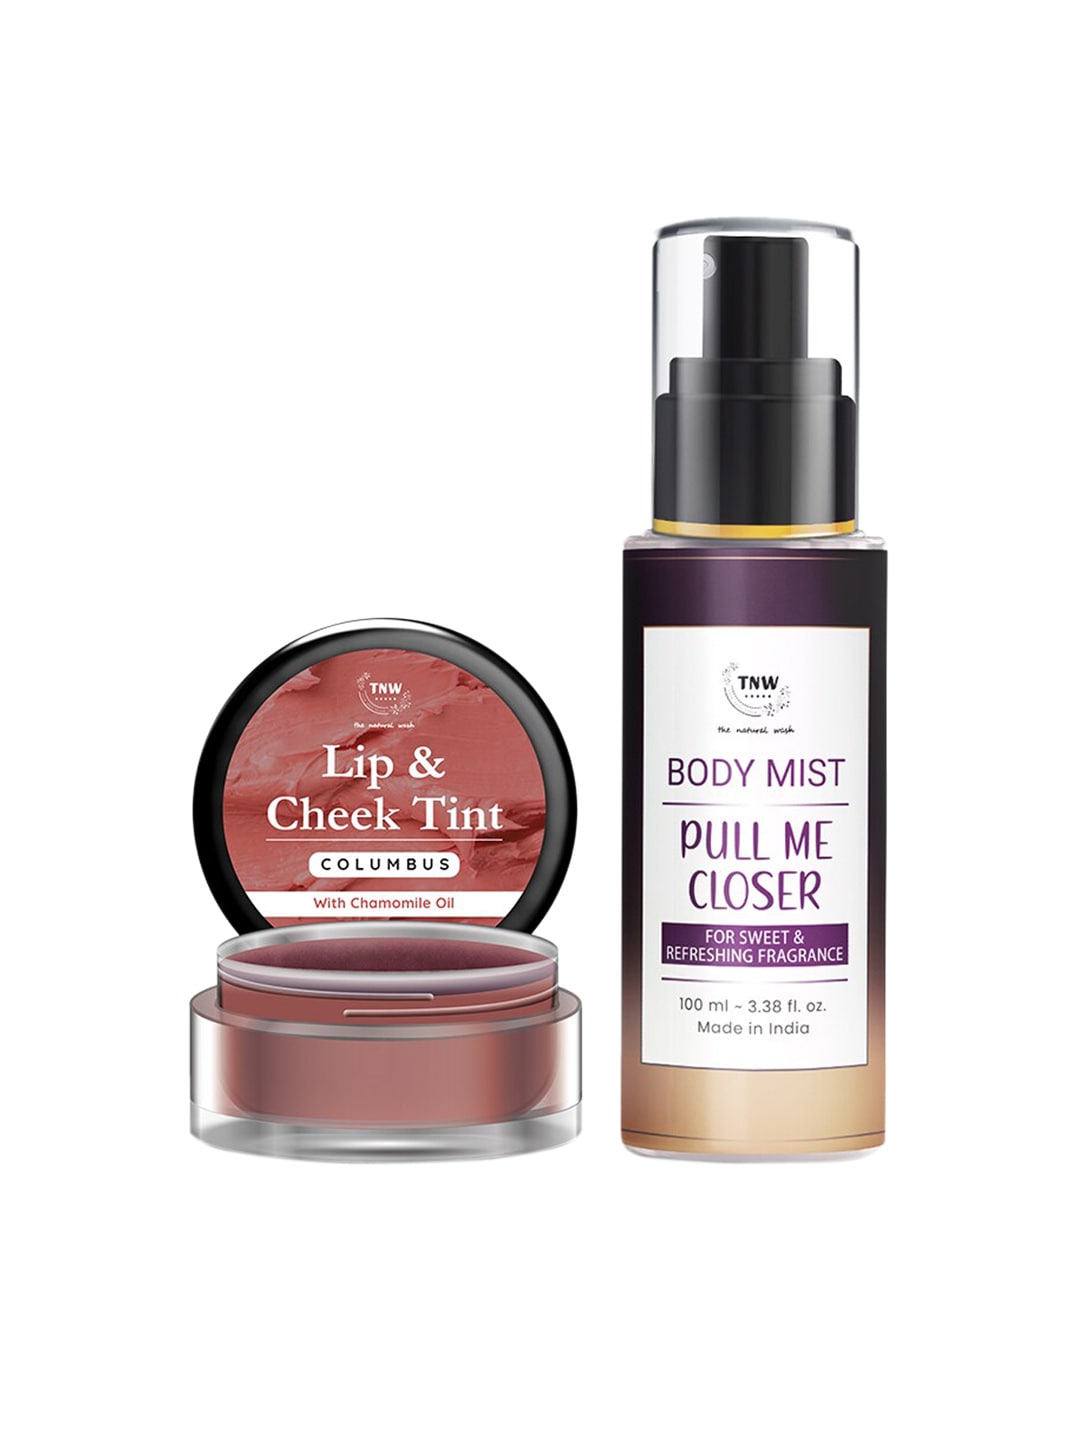 TNW the natural wash White Body Mist & Lip & Cheek Tint Combo Price in India